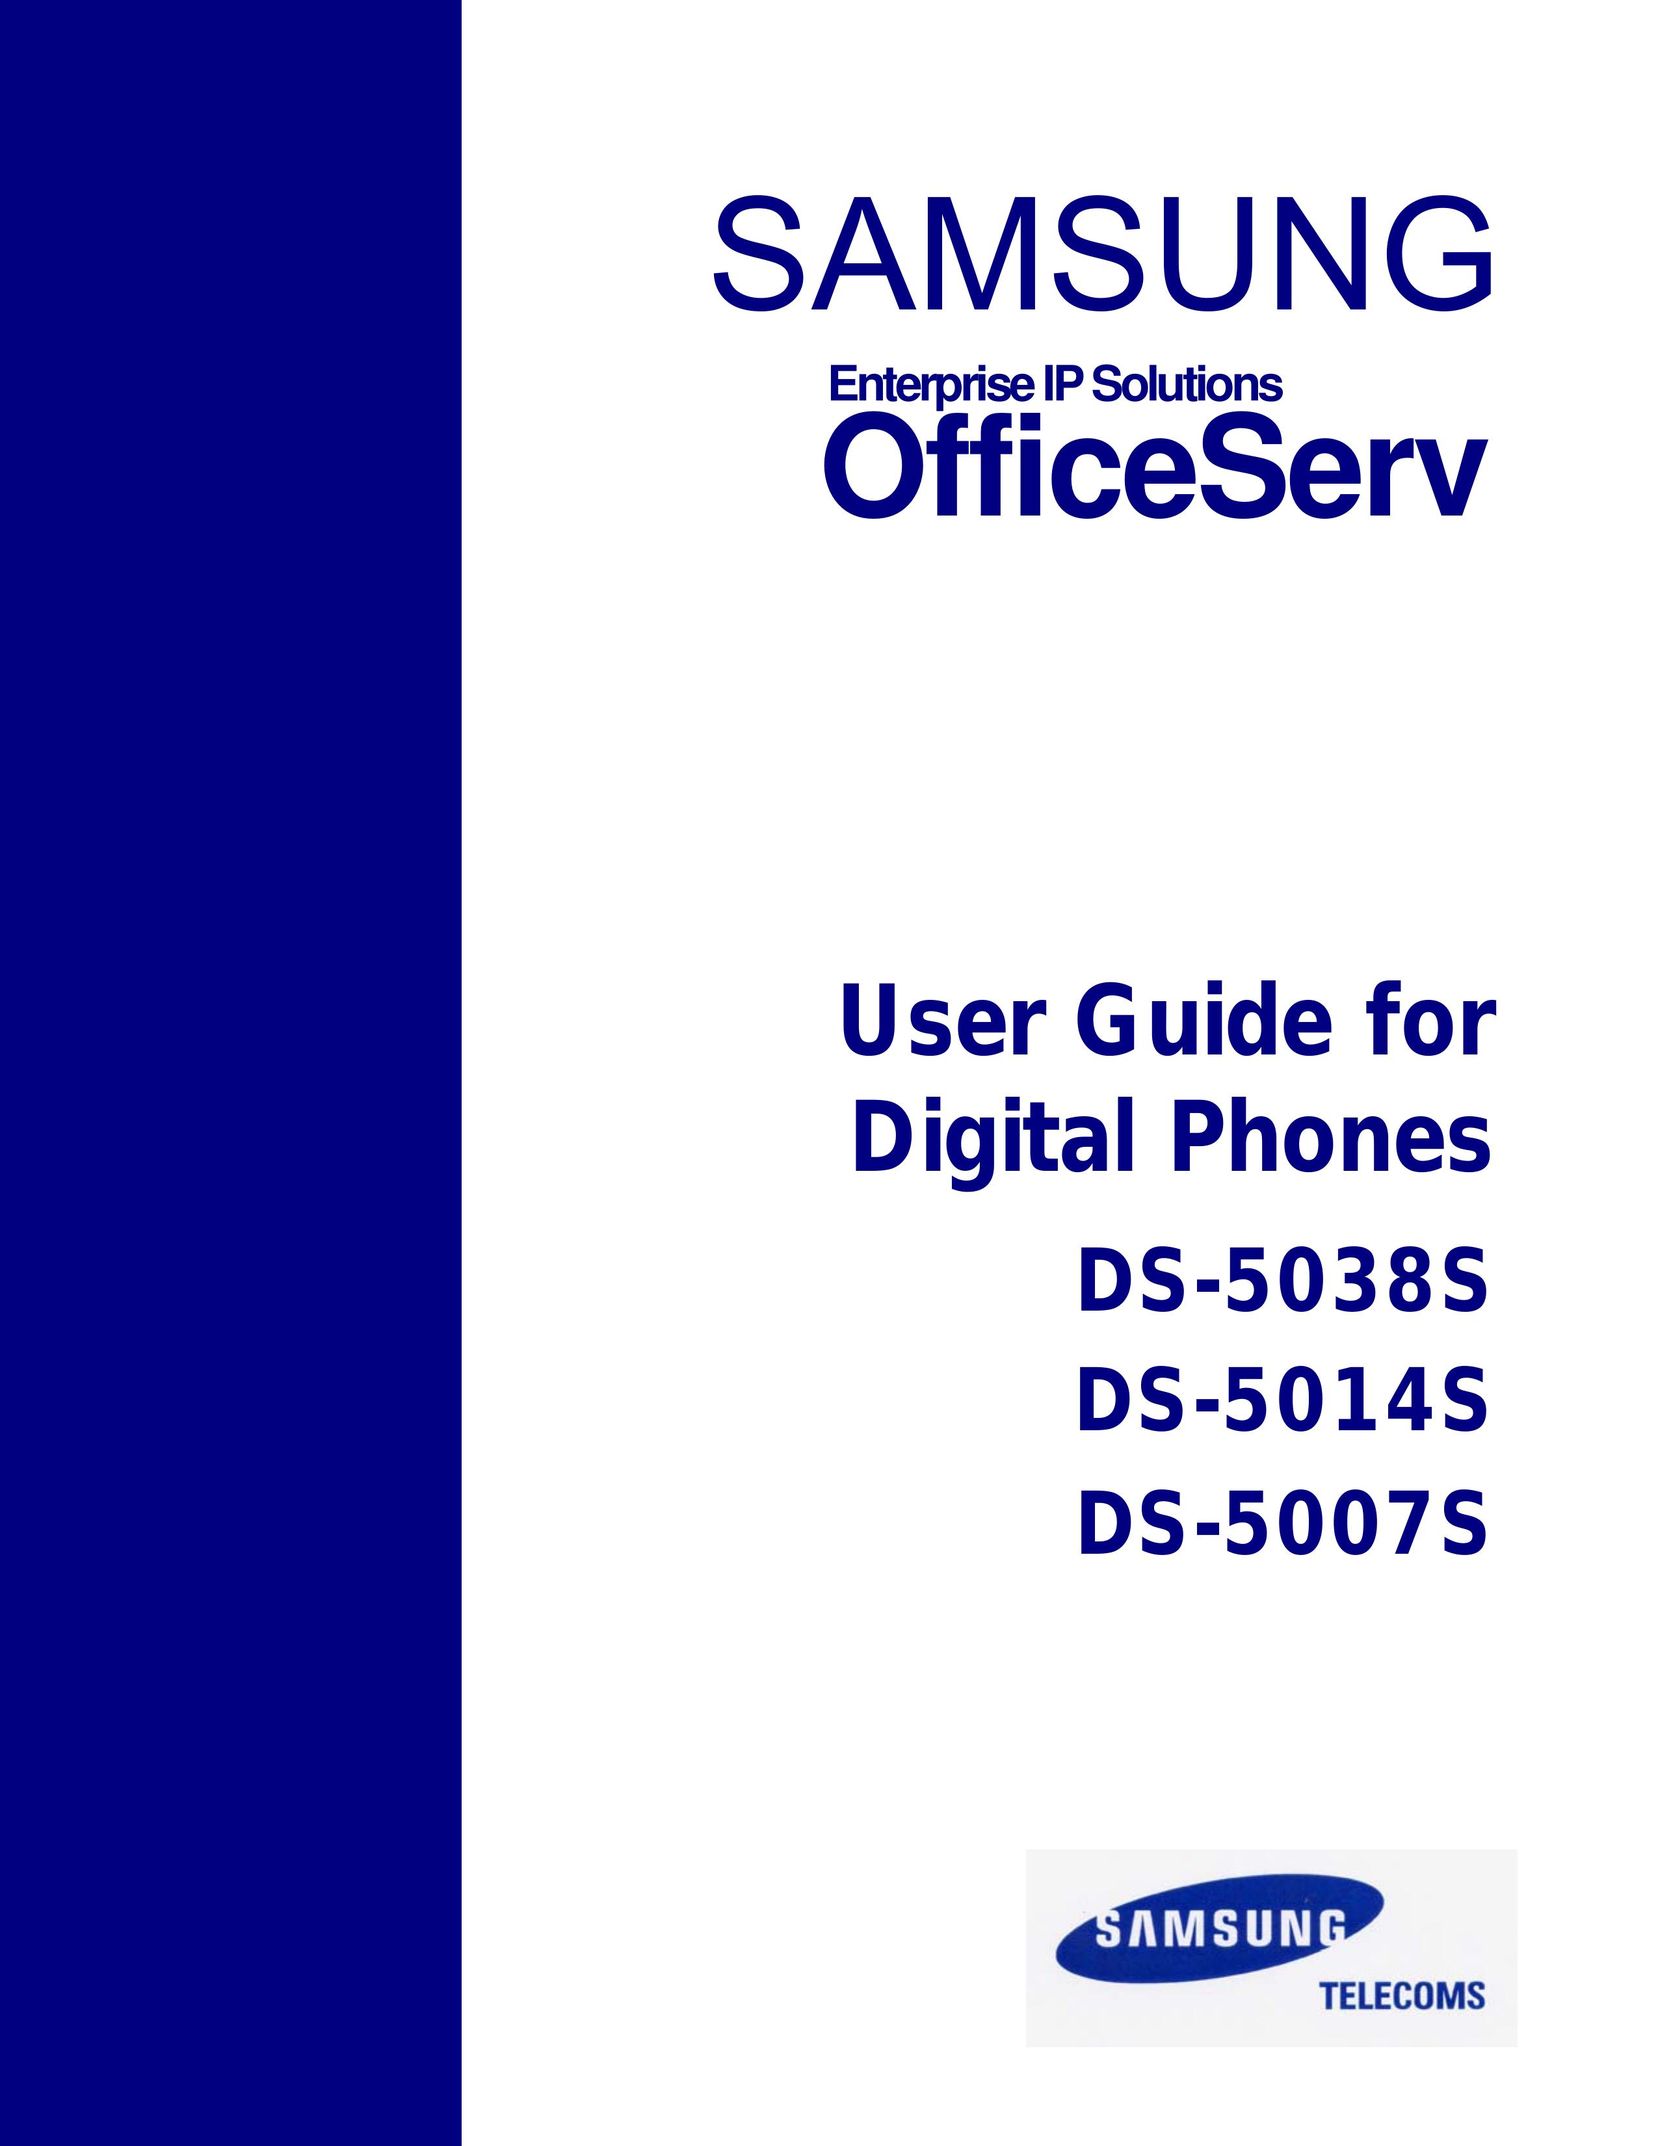 Samsung DS-5014S Telephone User Manual